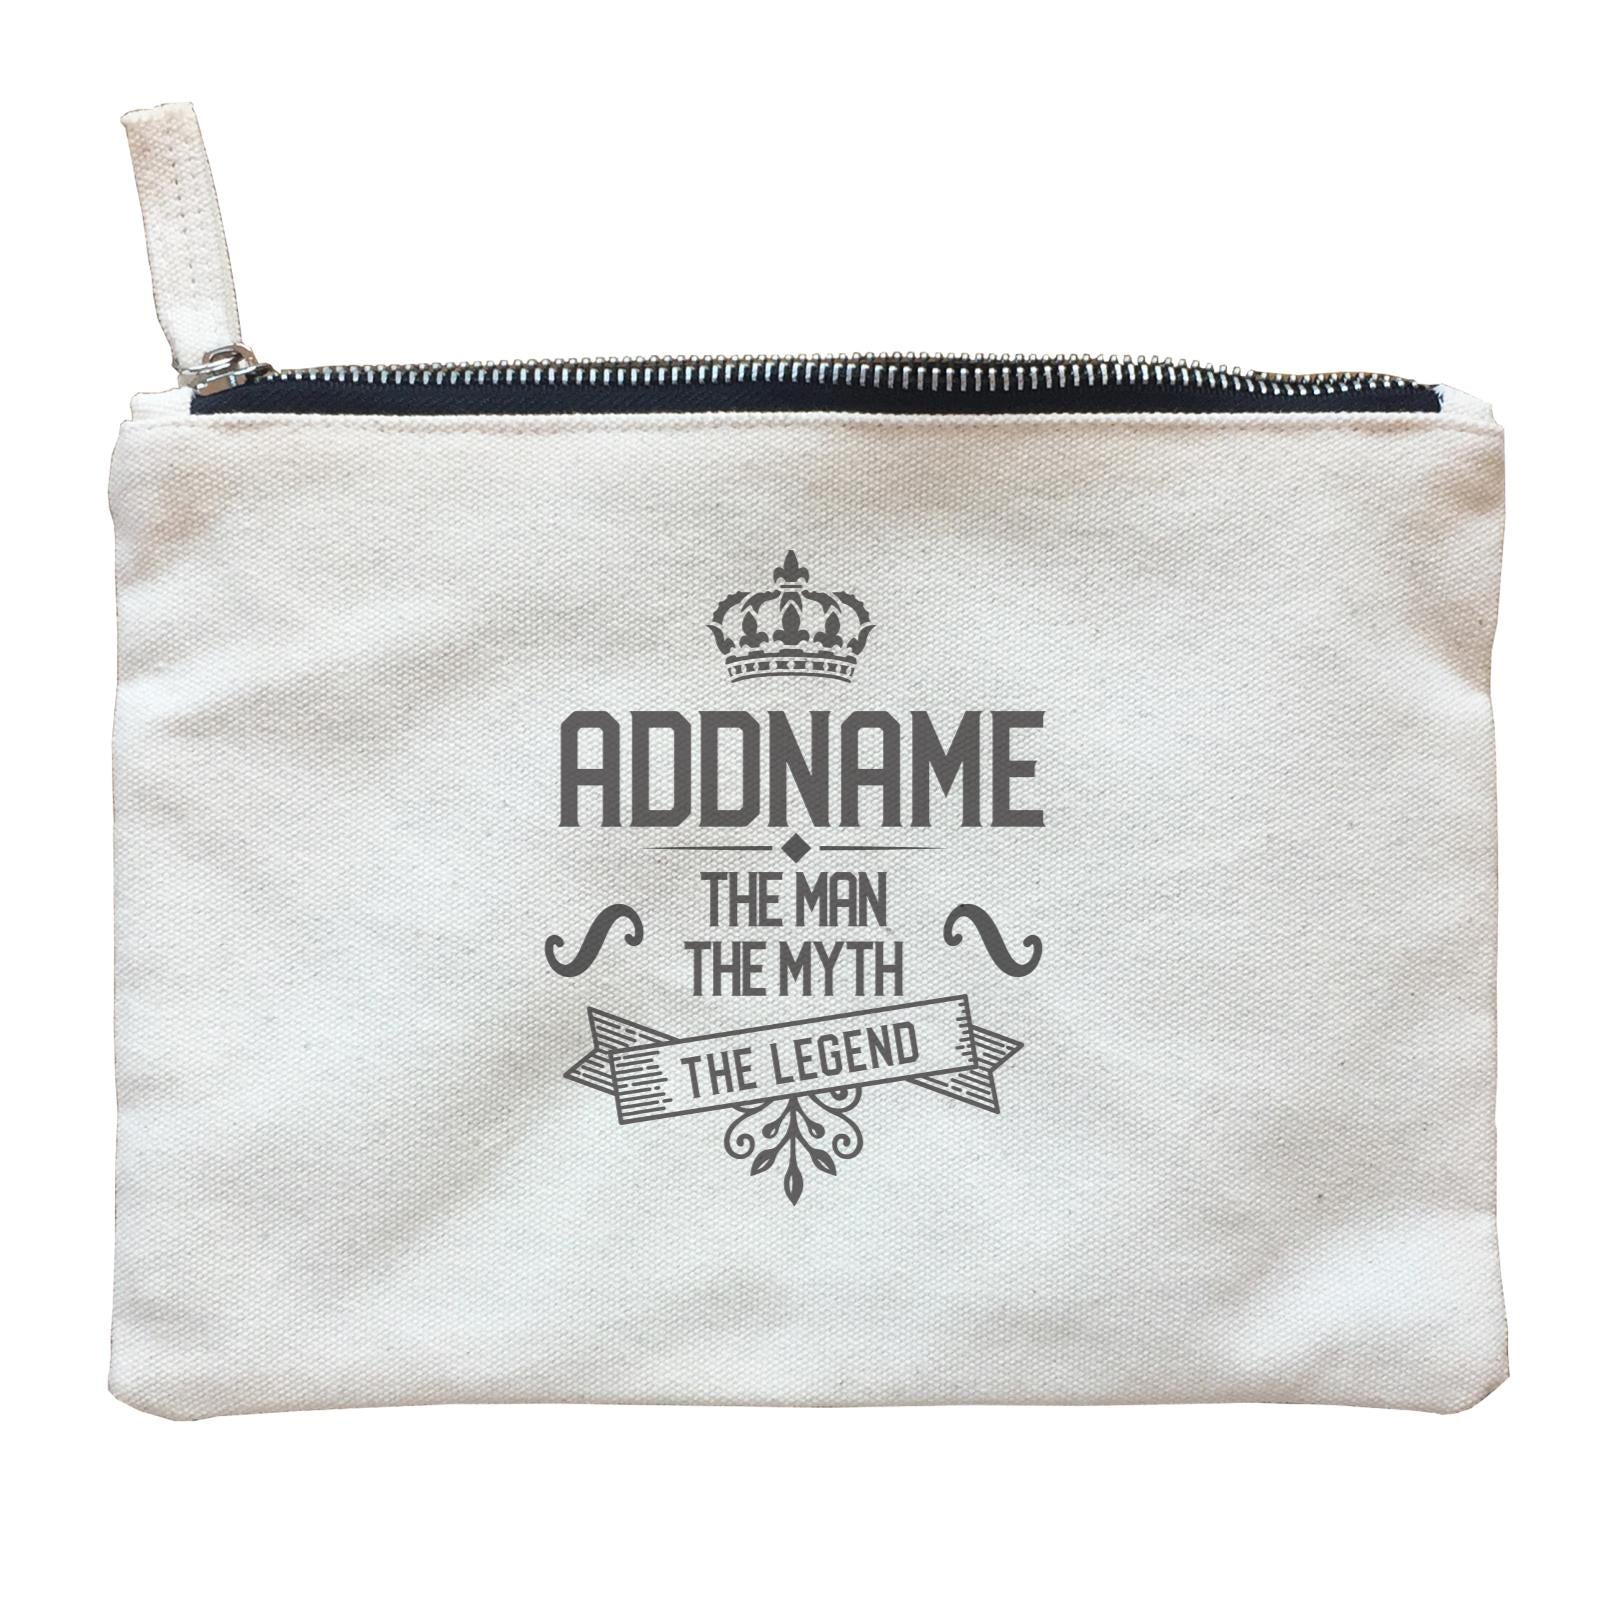 Personalize It Birthyear Addname The Man The Myth with Add Year Zipper Pouch